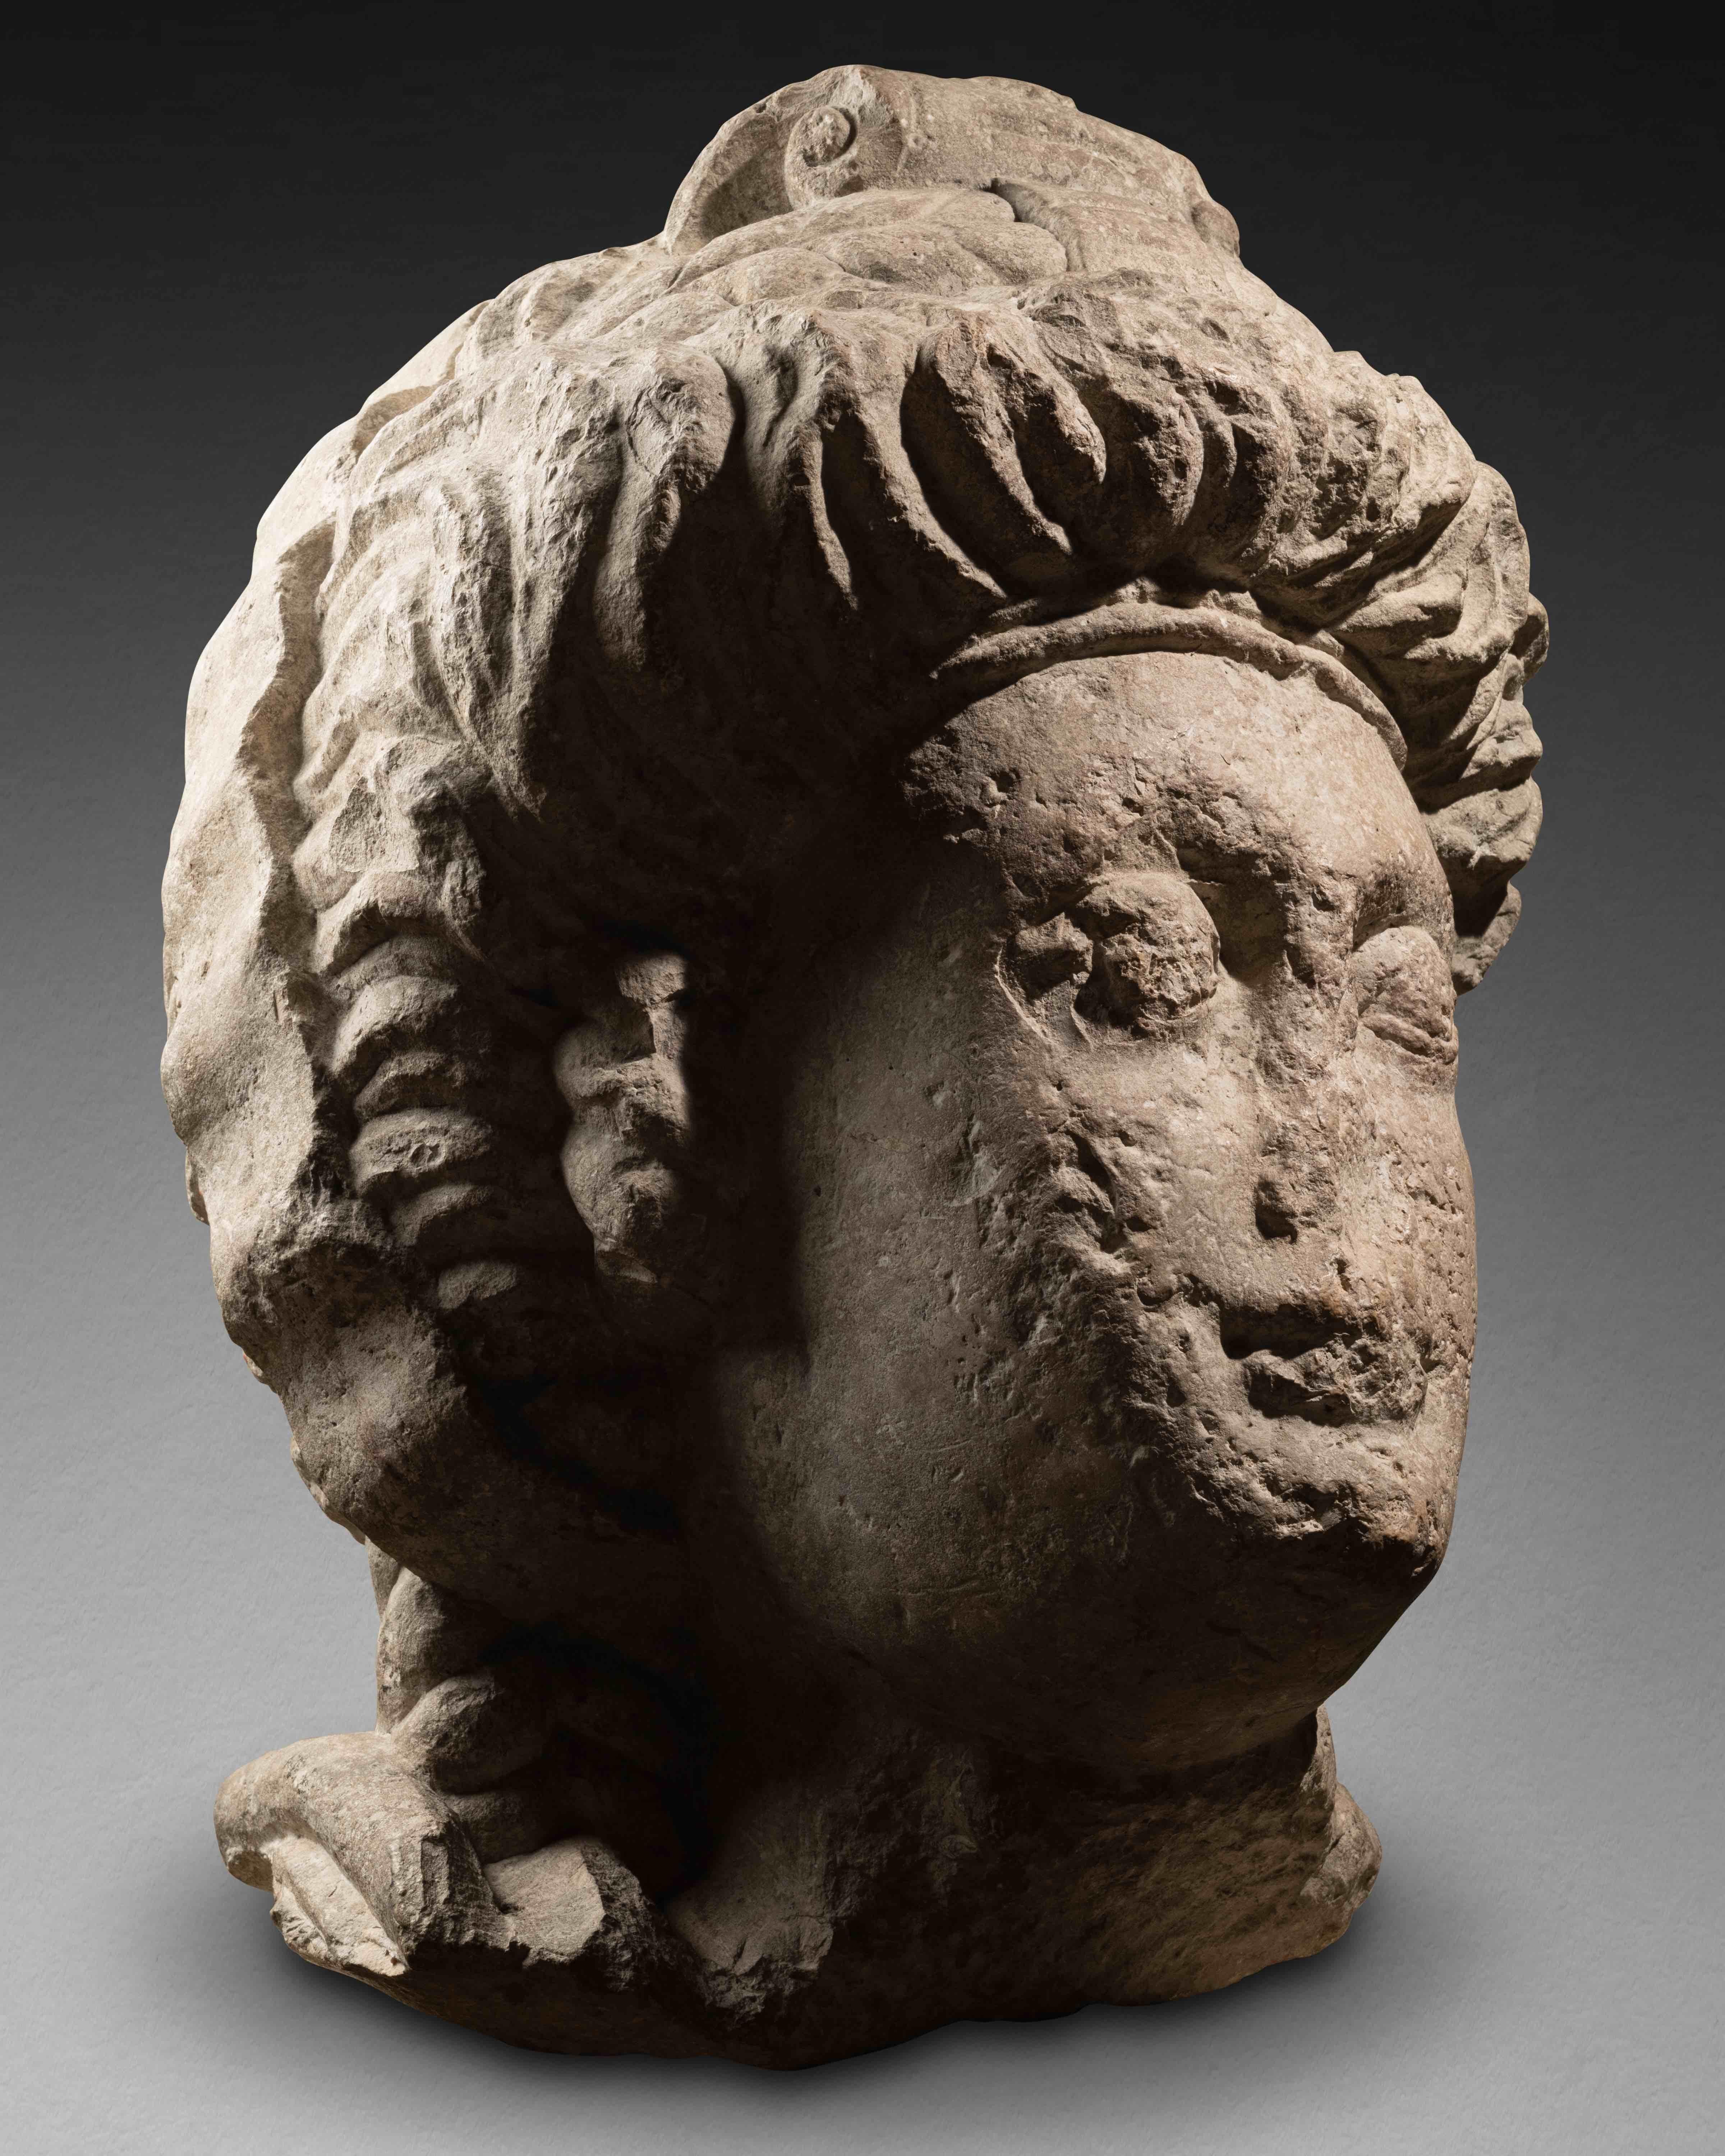 Very large feminine head crowned by a tiara
Roman period, 3rd - 4th century AD
Eastern provinces of the Roman Empire (Palmira?)
gray basalt
H 55 cm

Old collector's label visible in the lower right side.

Female head with idealized features. Despite